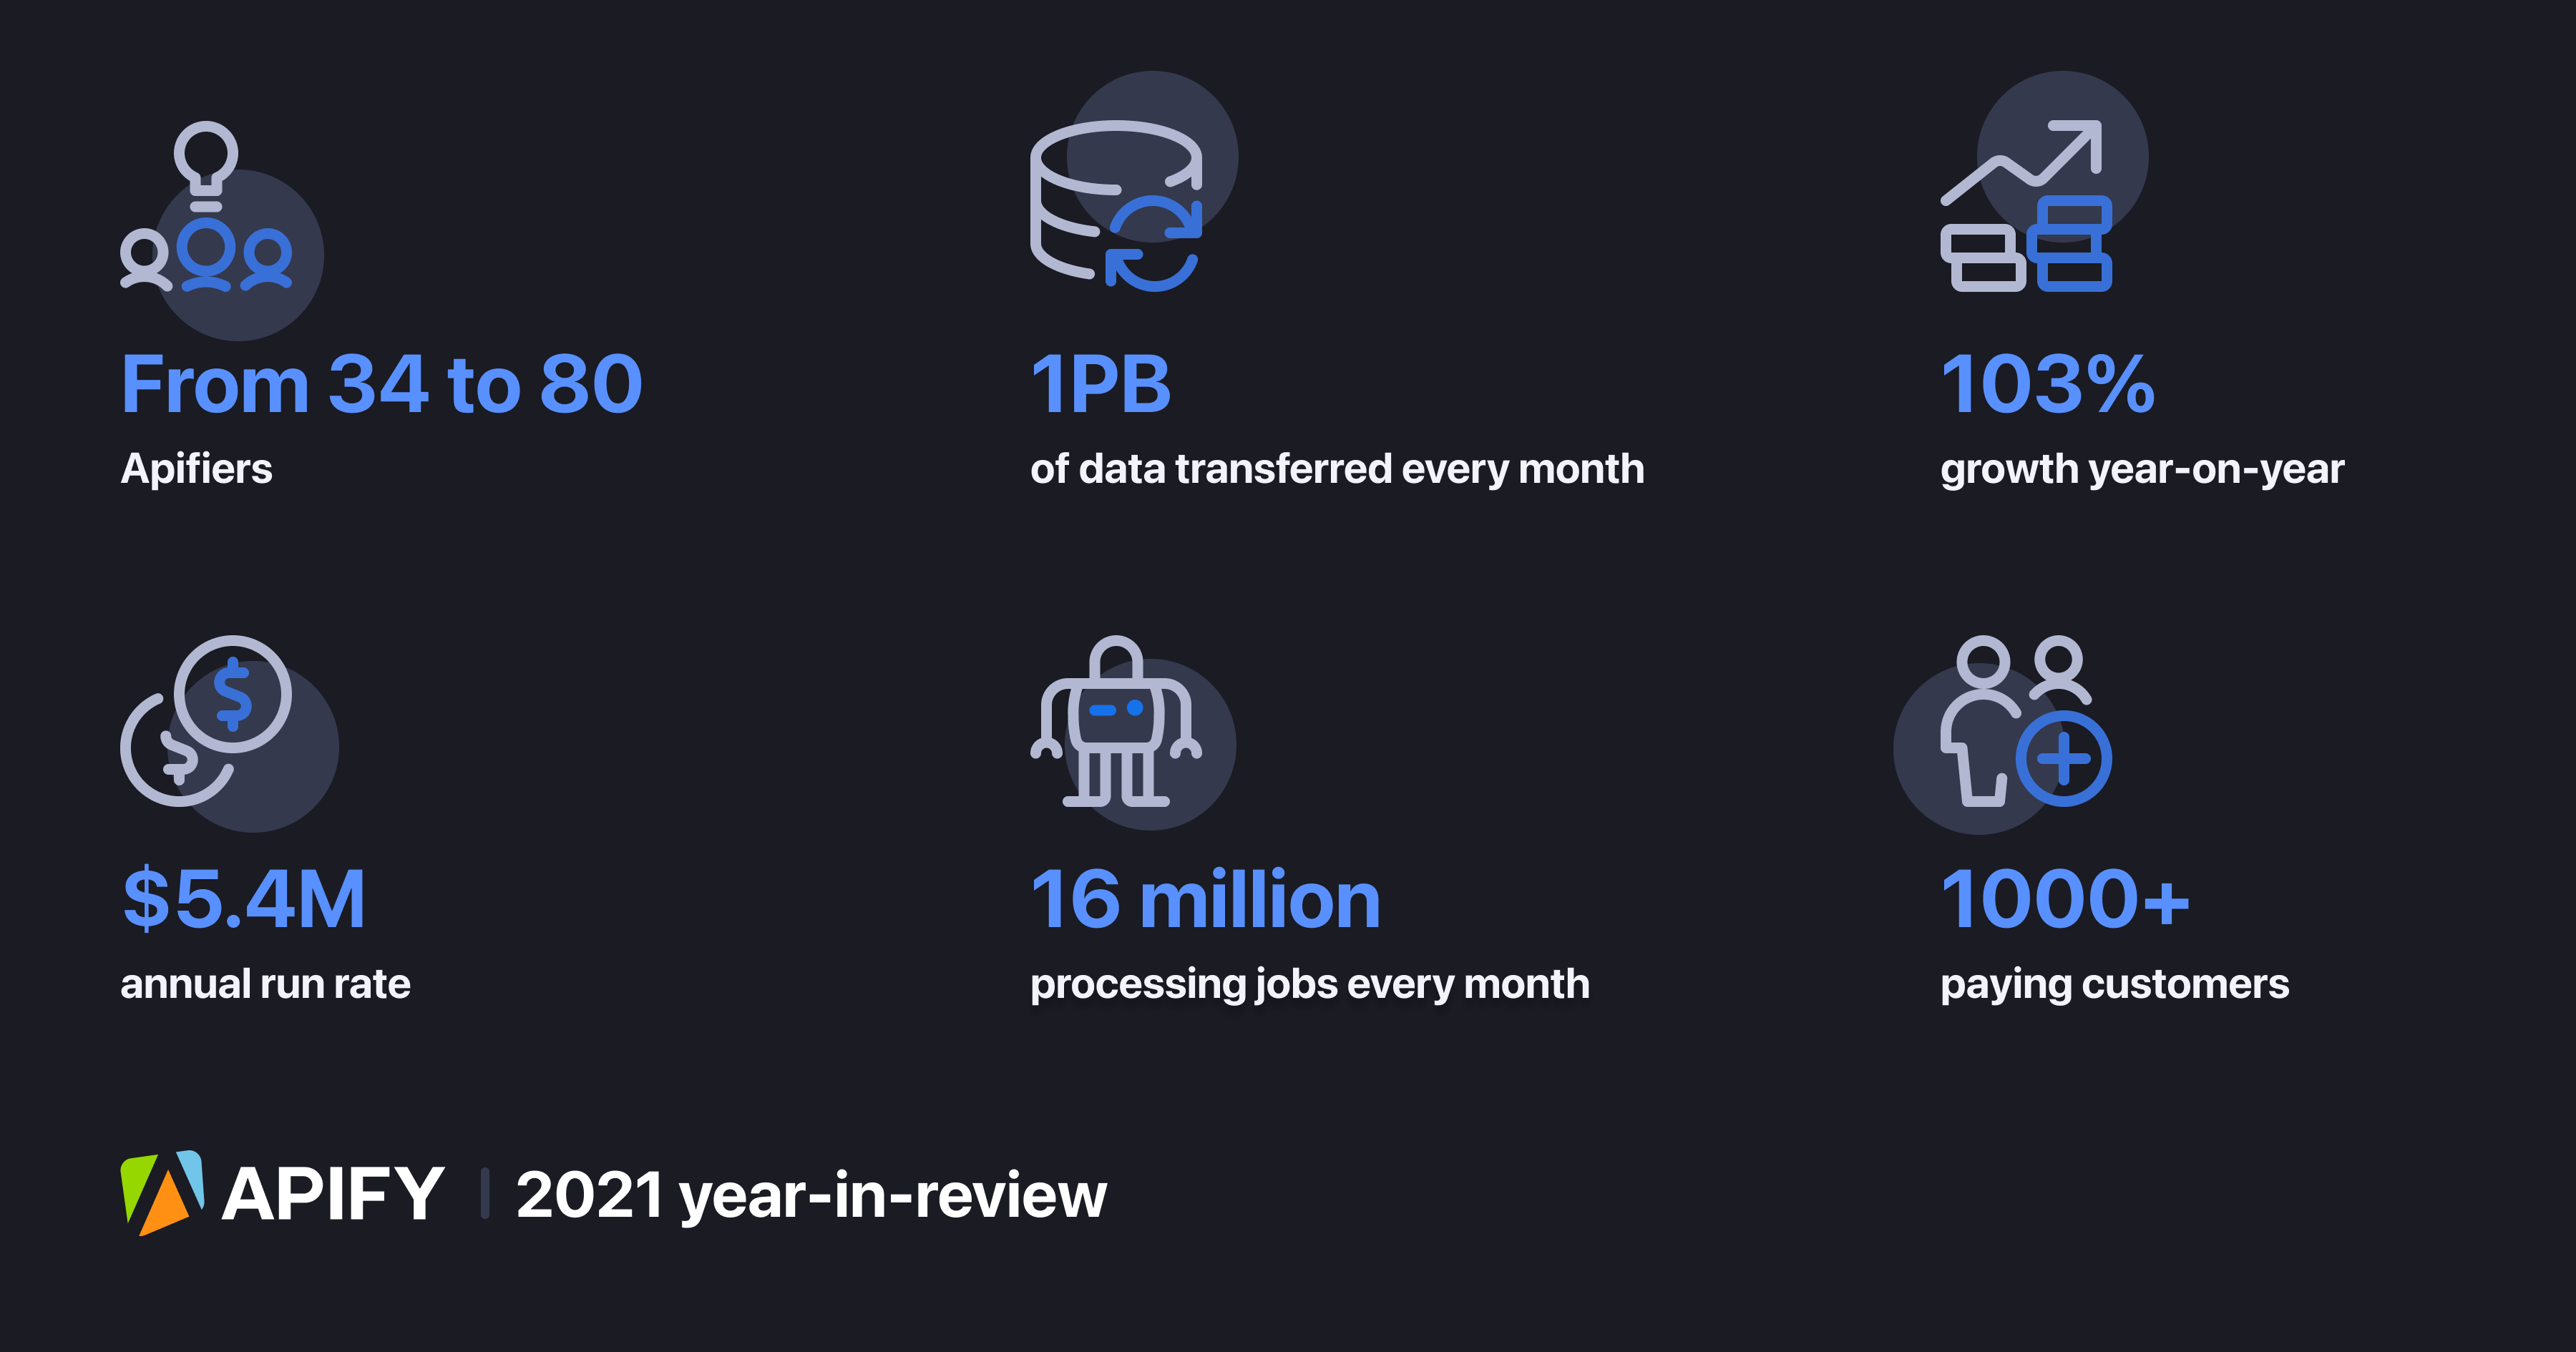 Apify - 2021 year-in-review